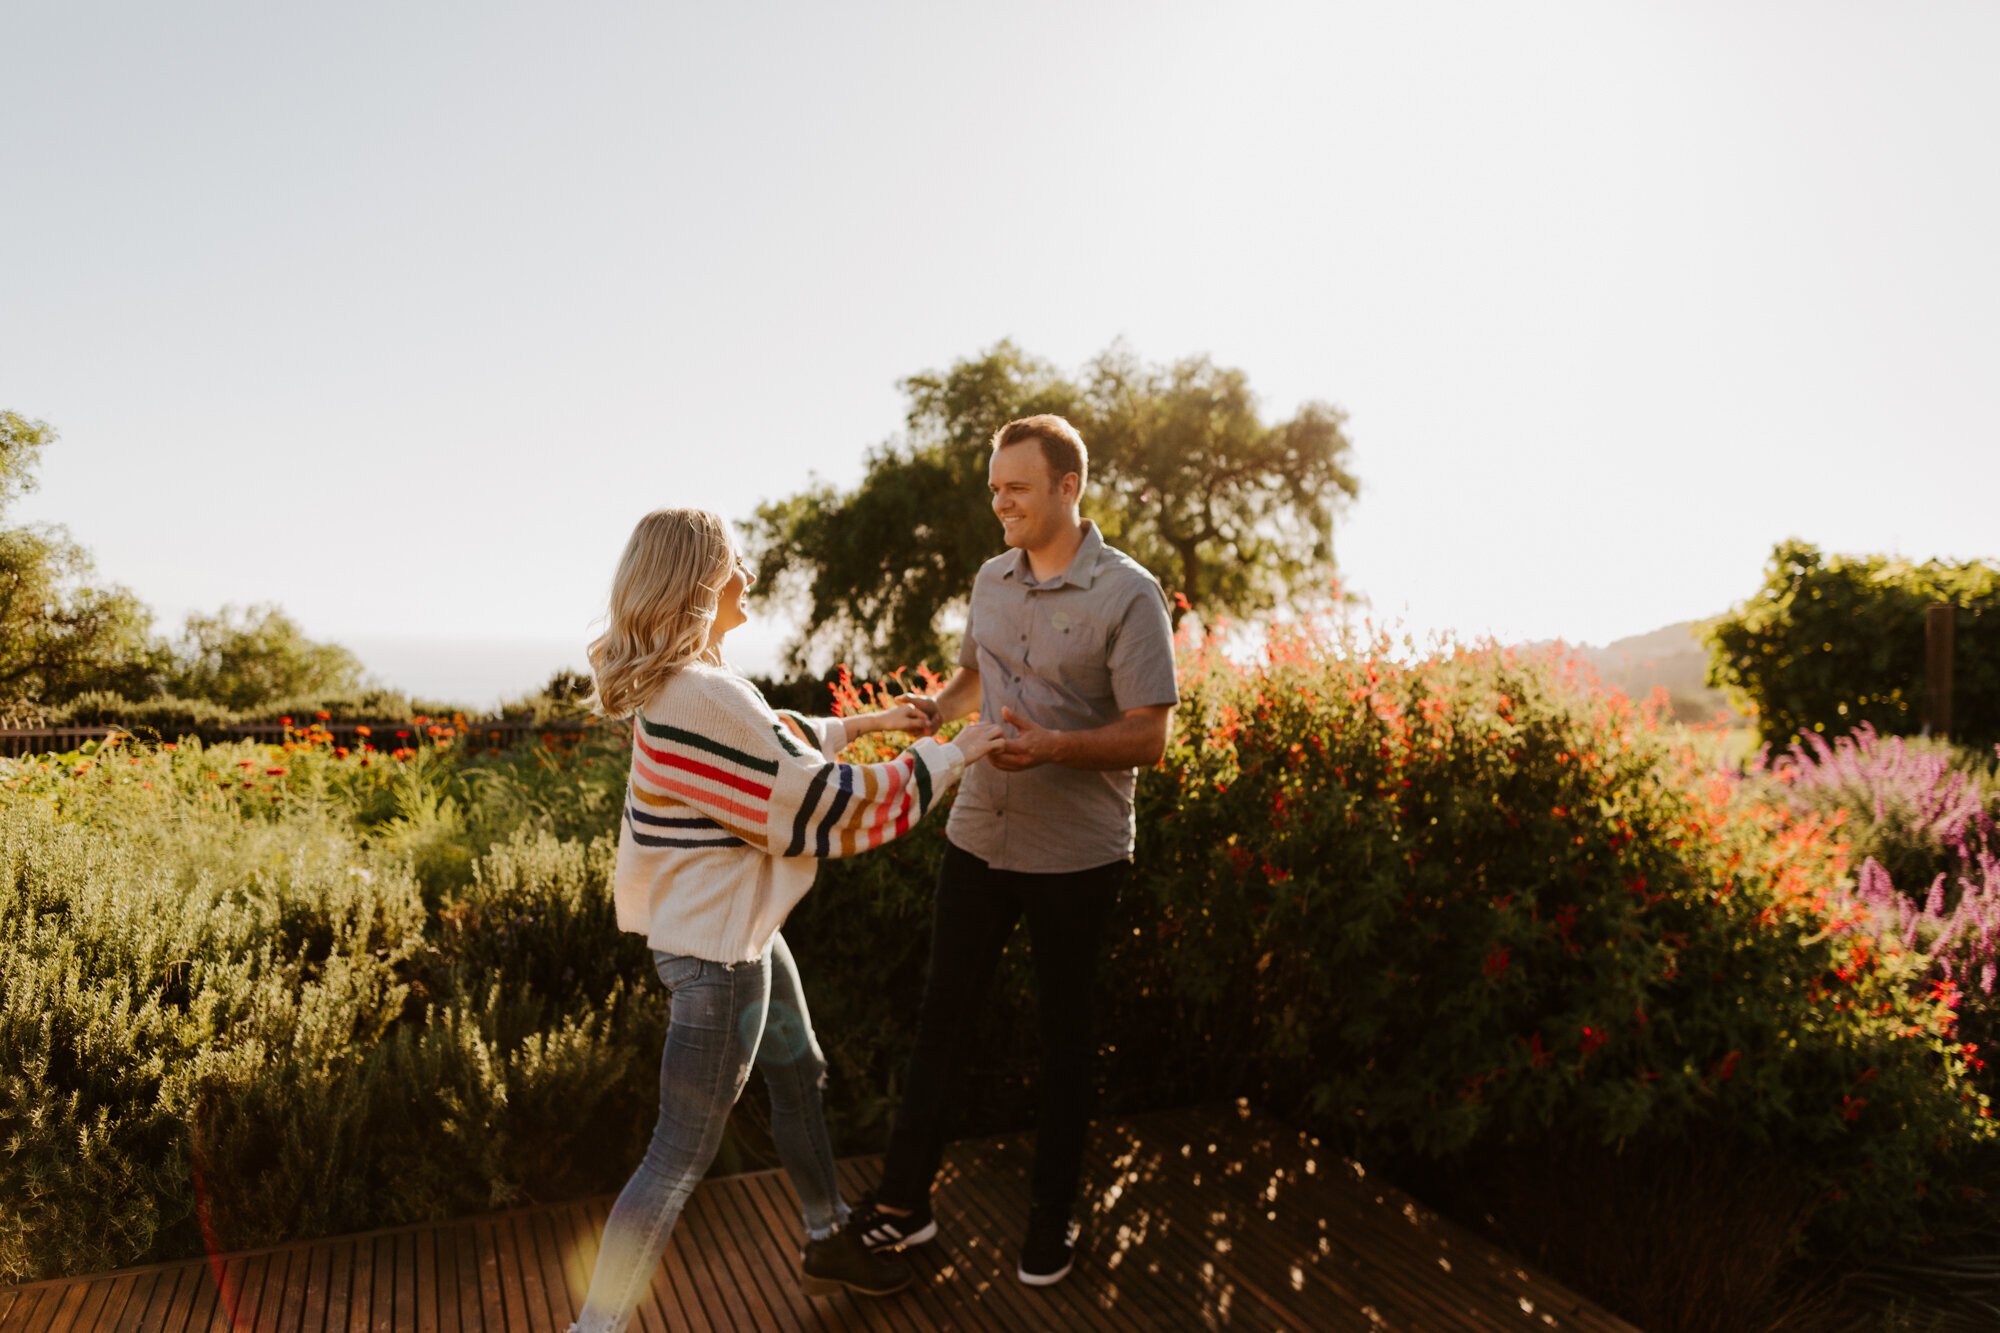 Rancho Palos Verdes Engagement Session at Catalina View Gardens, California Wedding Photographer, Los Angeles Wedding Photographer, Winery Wedding Venue, Sunset Couples Photos, Photo by Tida Svy